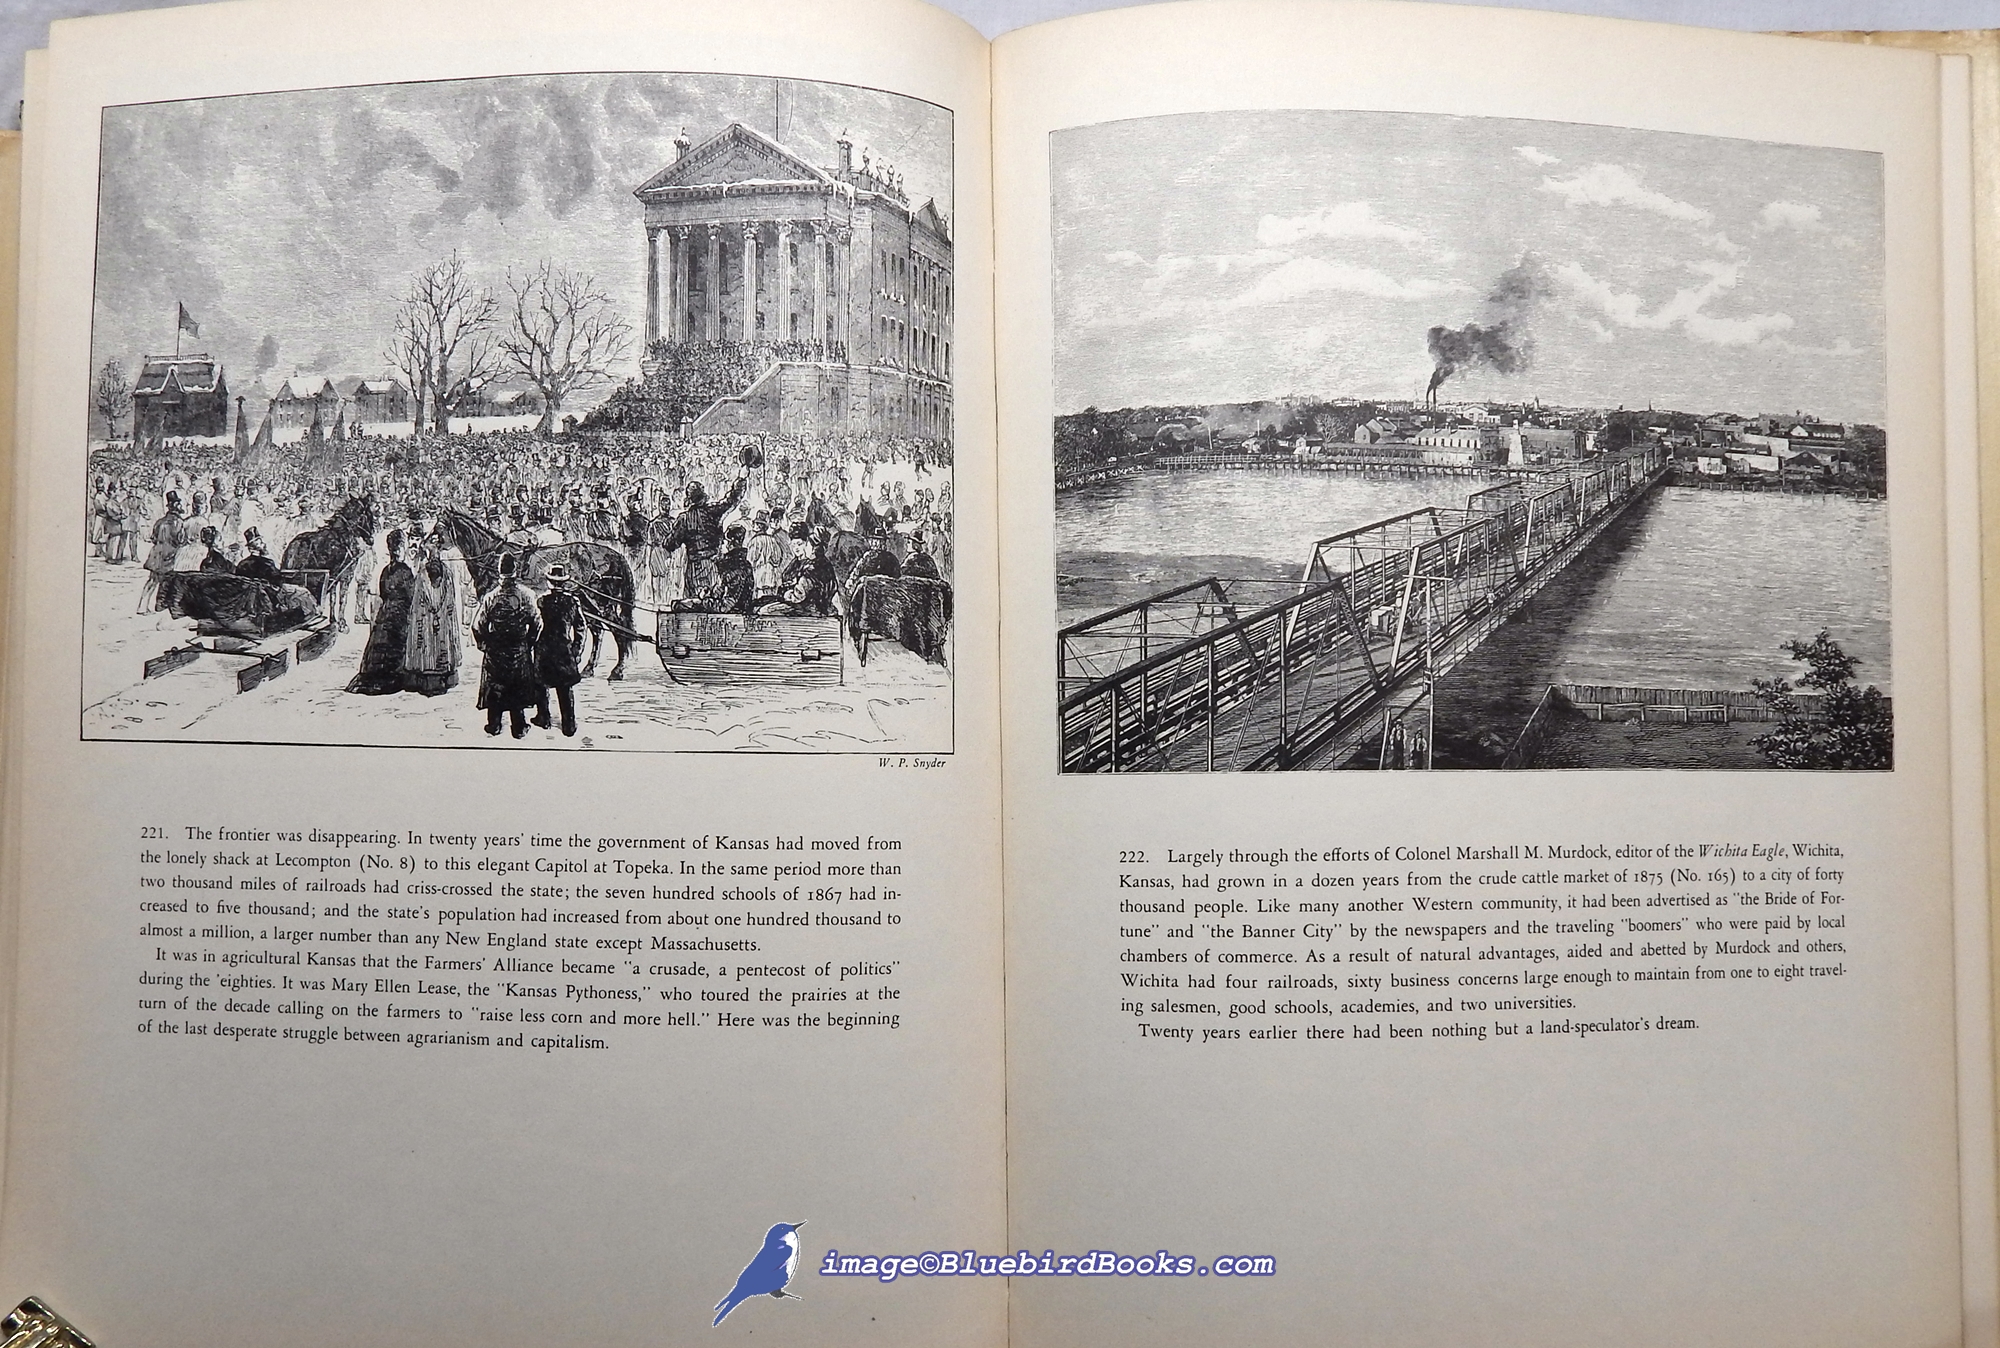 KOUWENHOVEN, JOHN A. - Adventures of America, 1857-1900: A Pictorial Record from Harper's Weekly